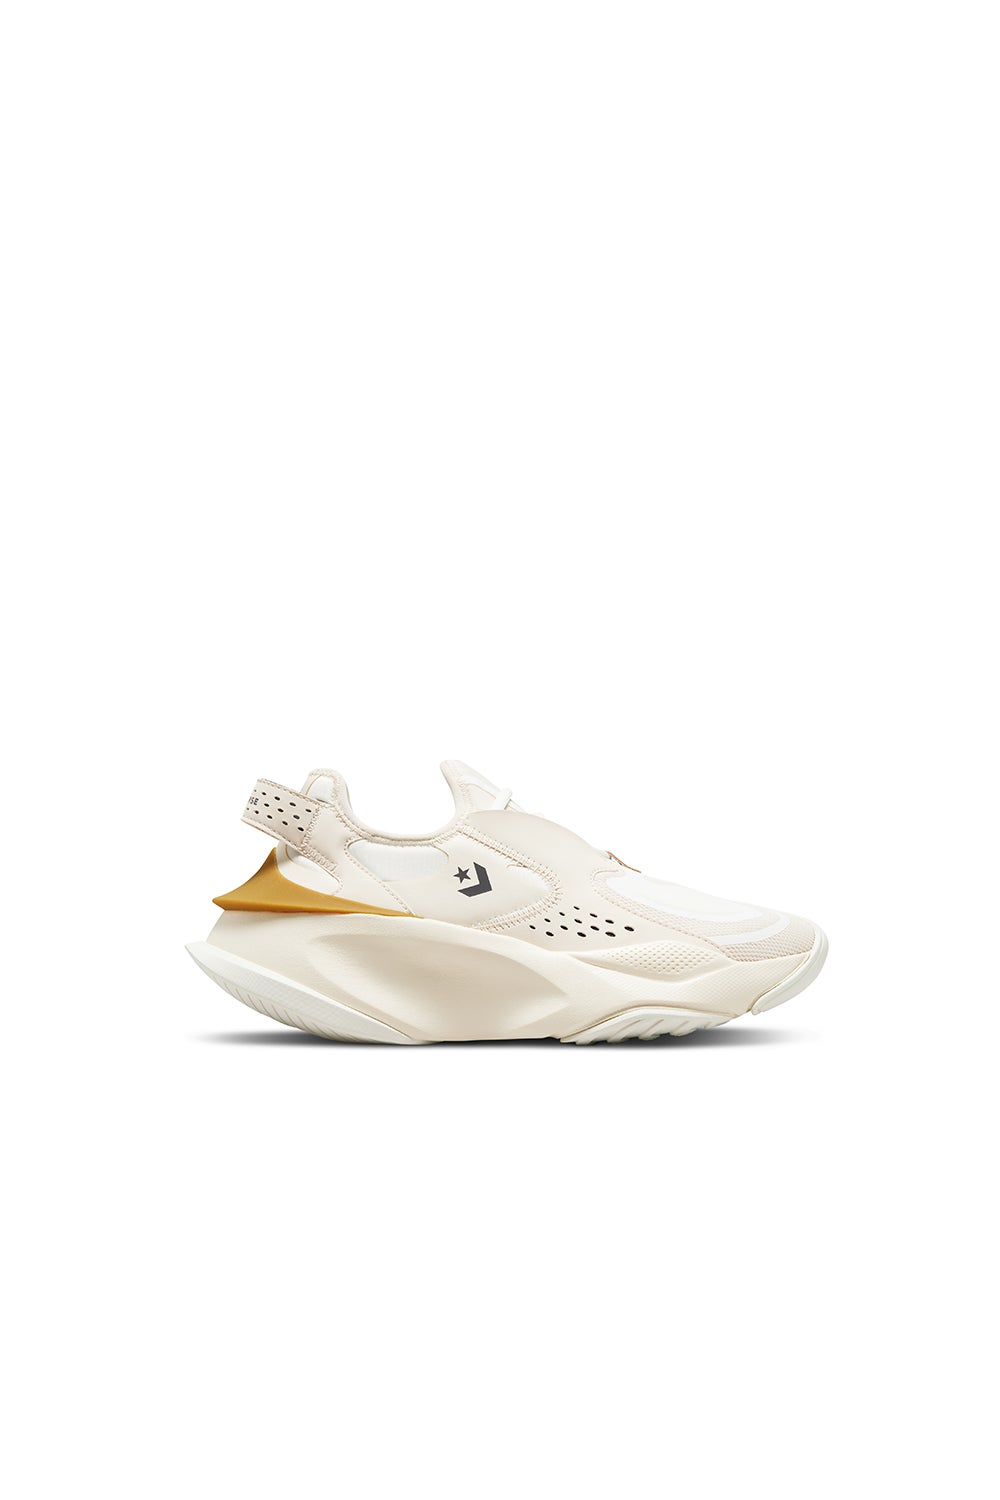 Converse Aeon Active CX Low Top Natural Ivory